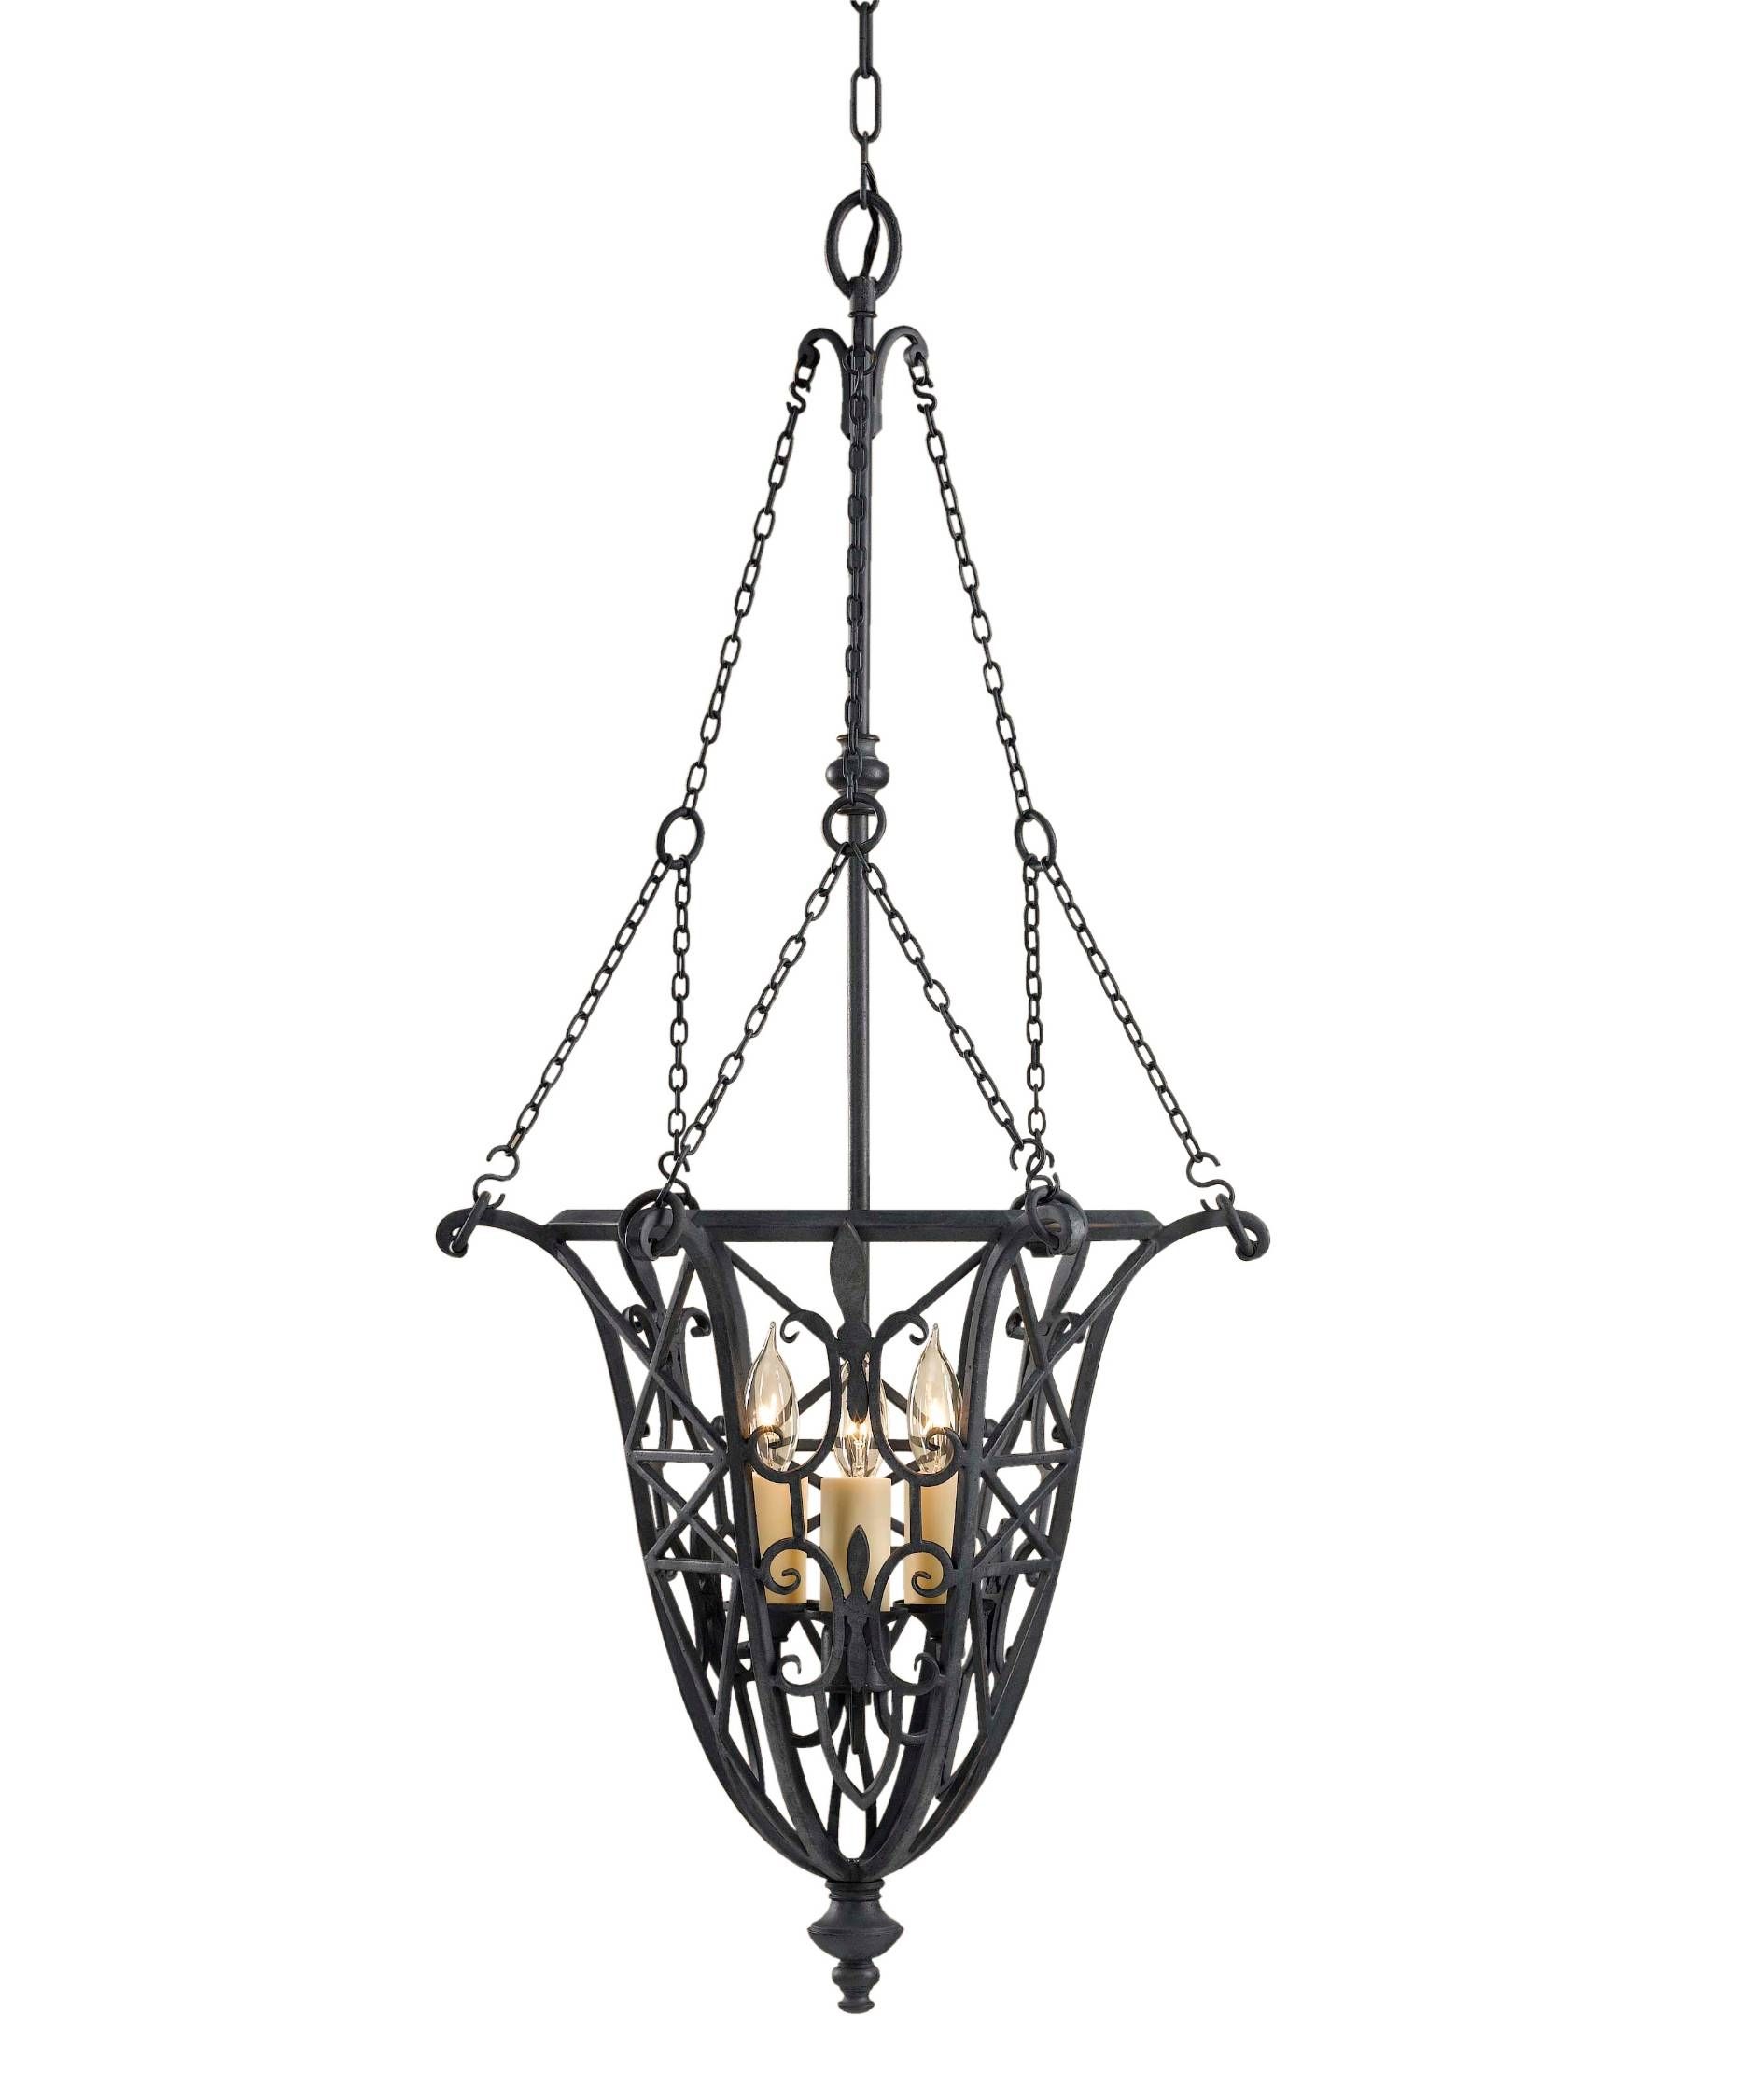 Amazing Of Wrought Iron Pendant Light Related To House Decor Within Wrought Iron Kitchen Lights Fixtures 